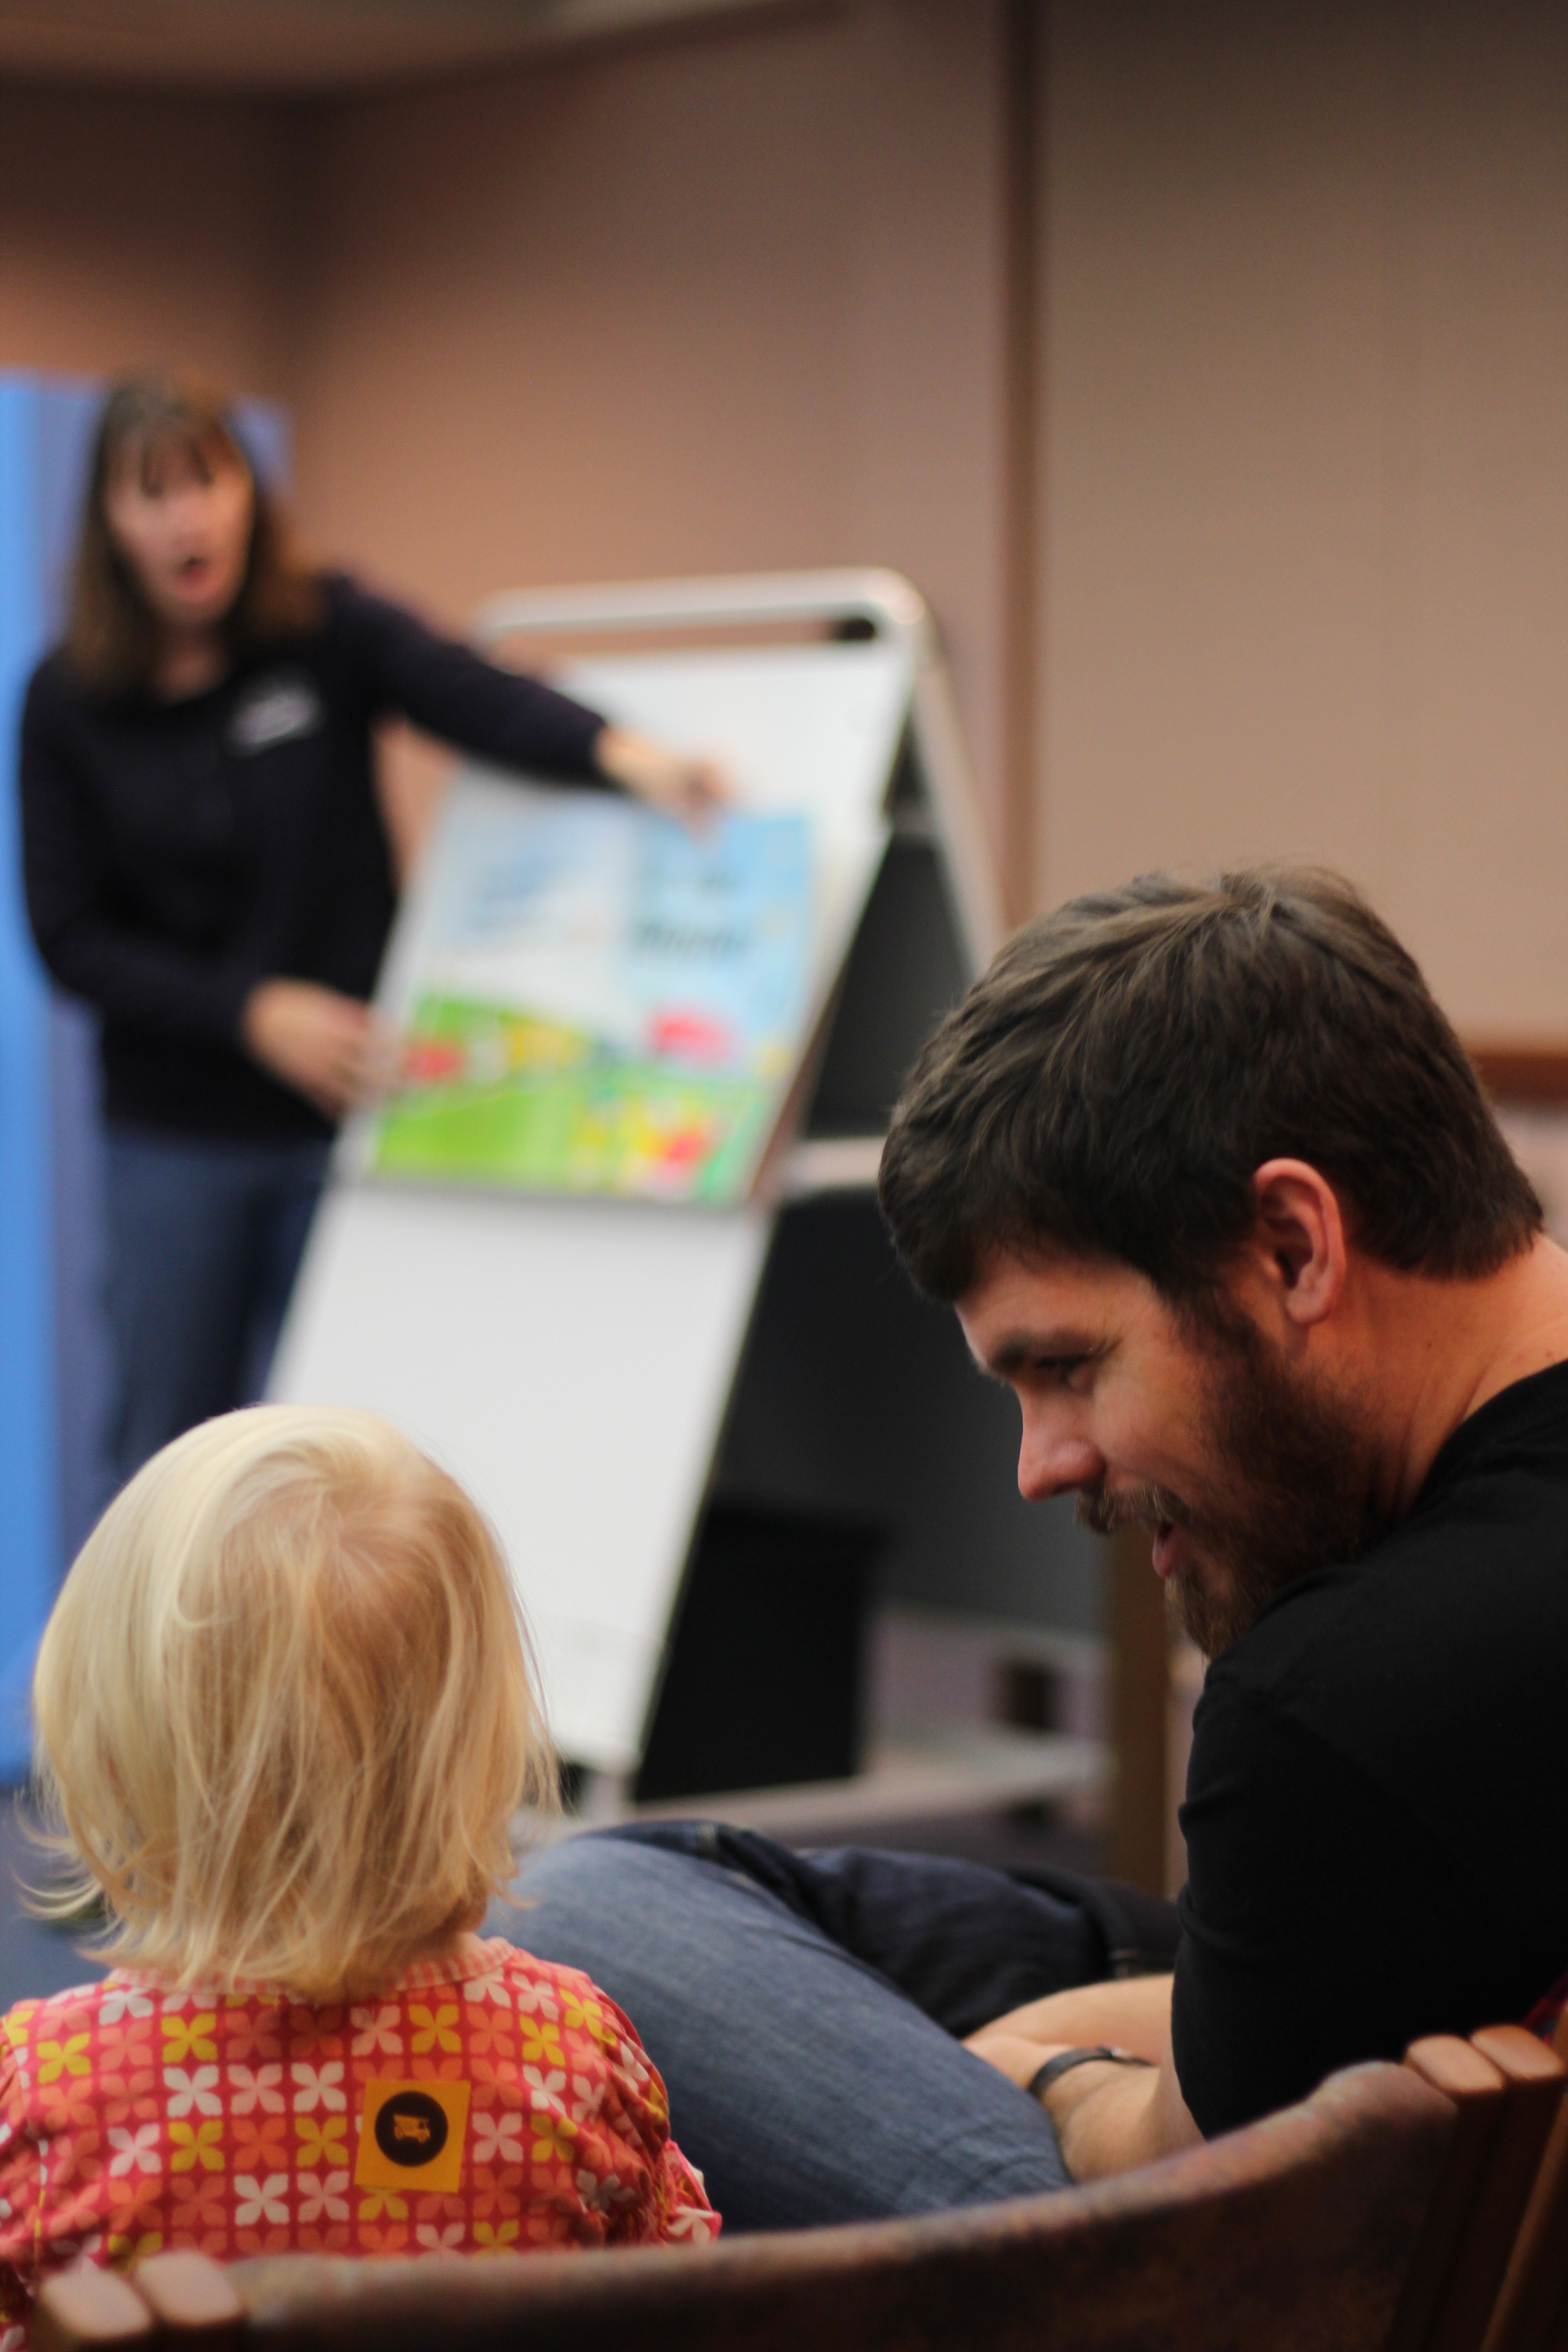 Adult and child interacting with storytime presenter in background